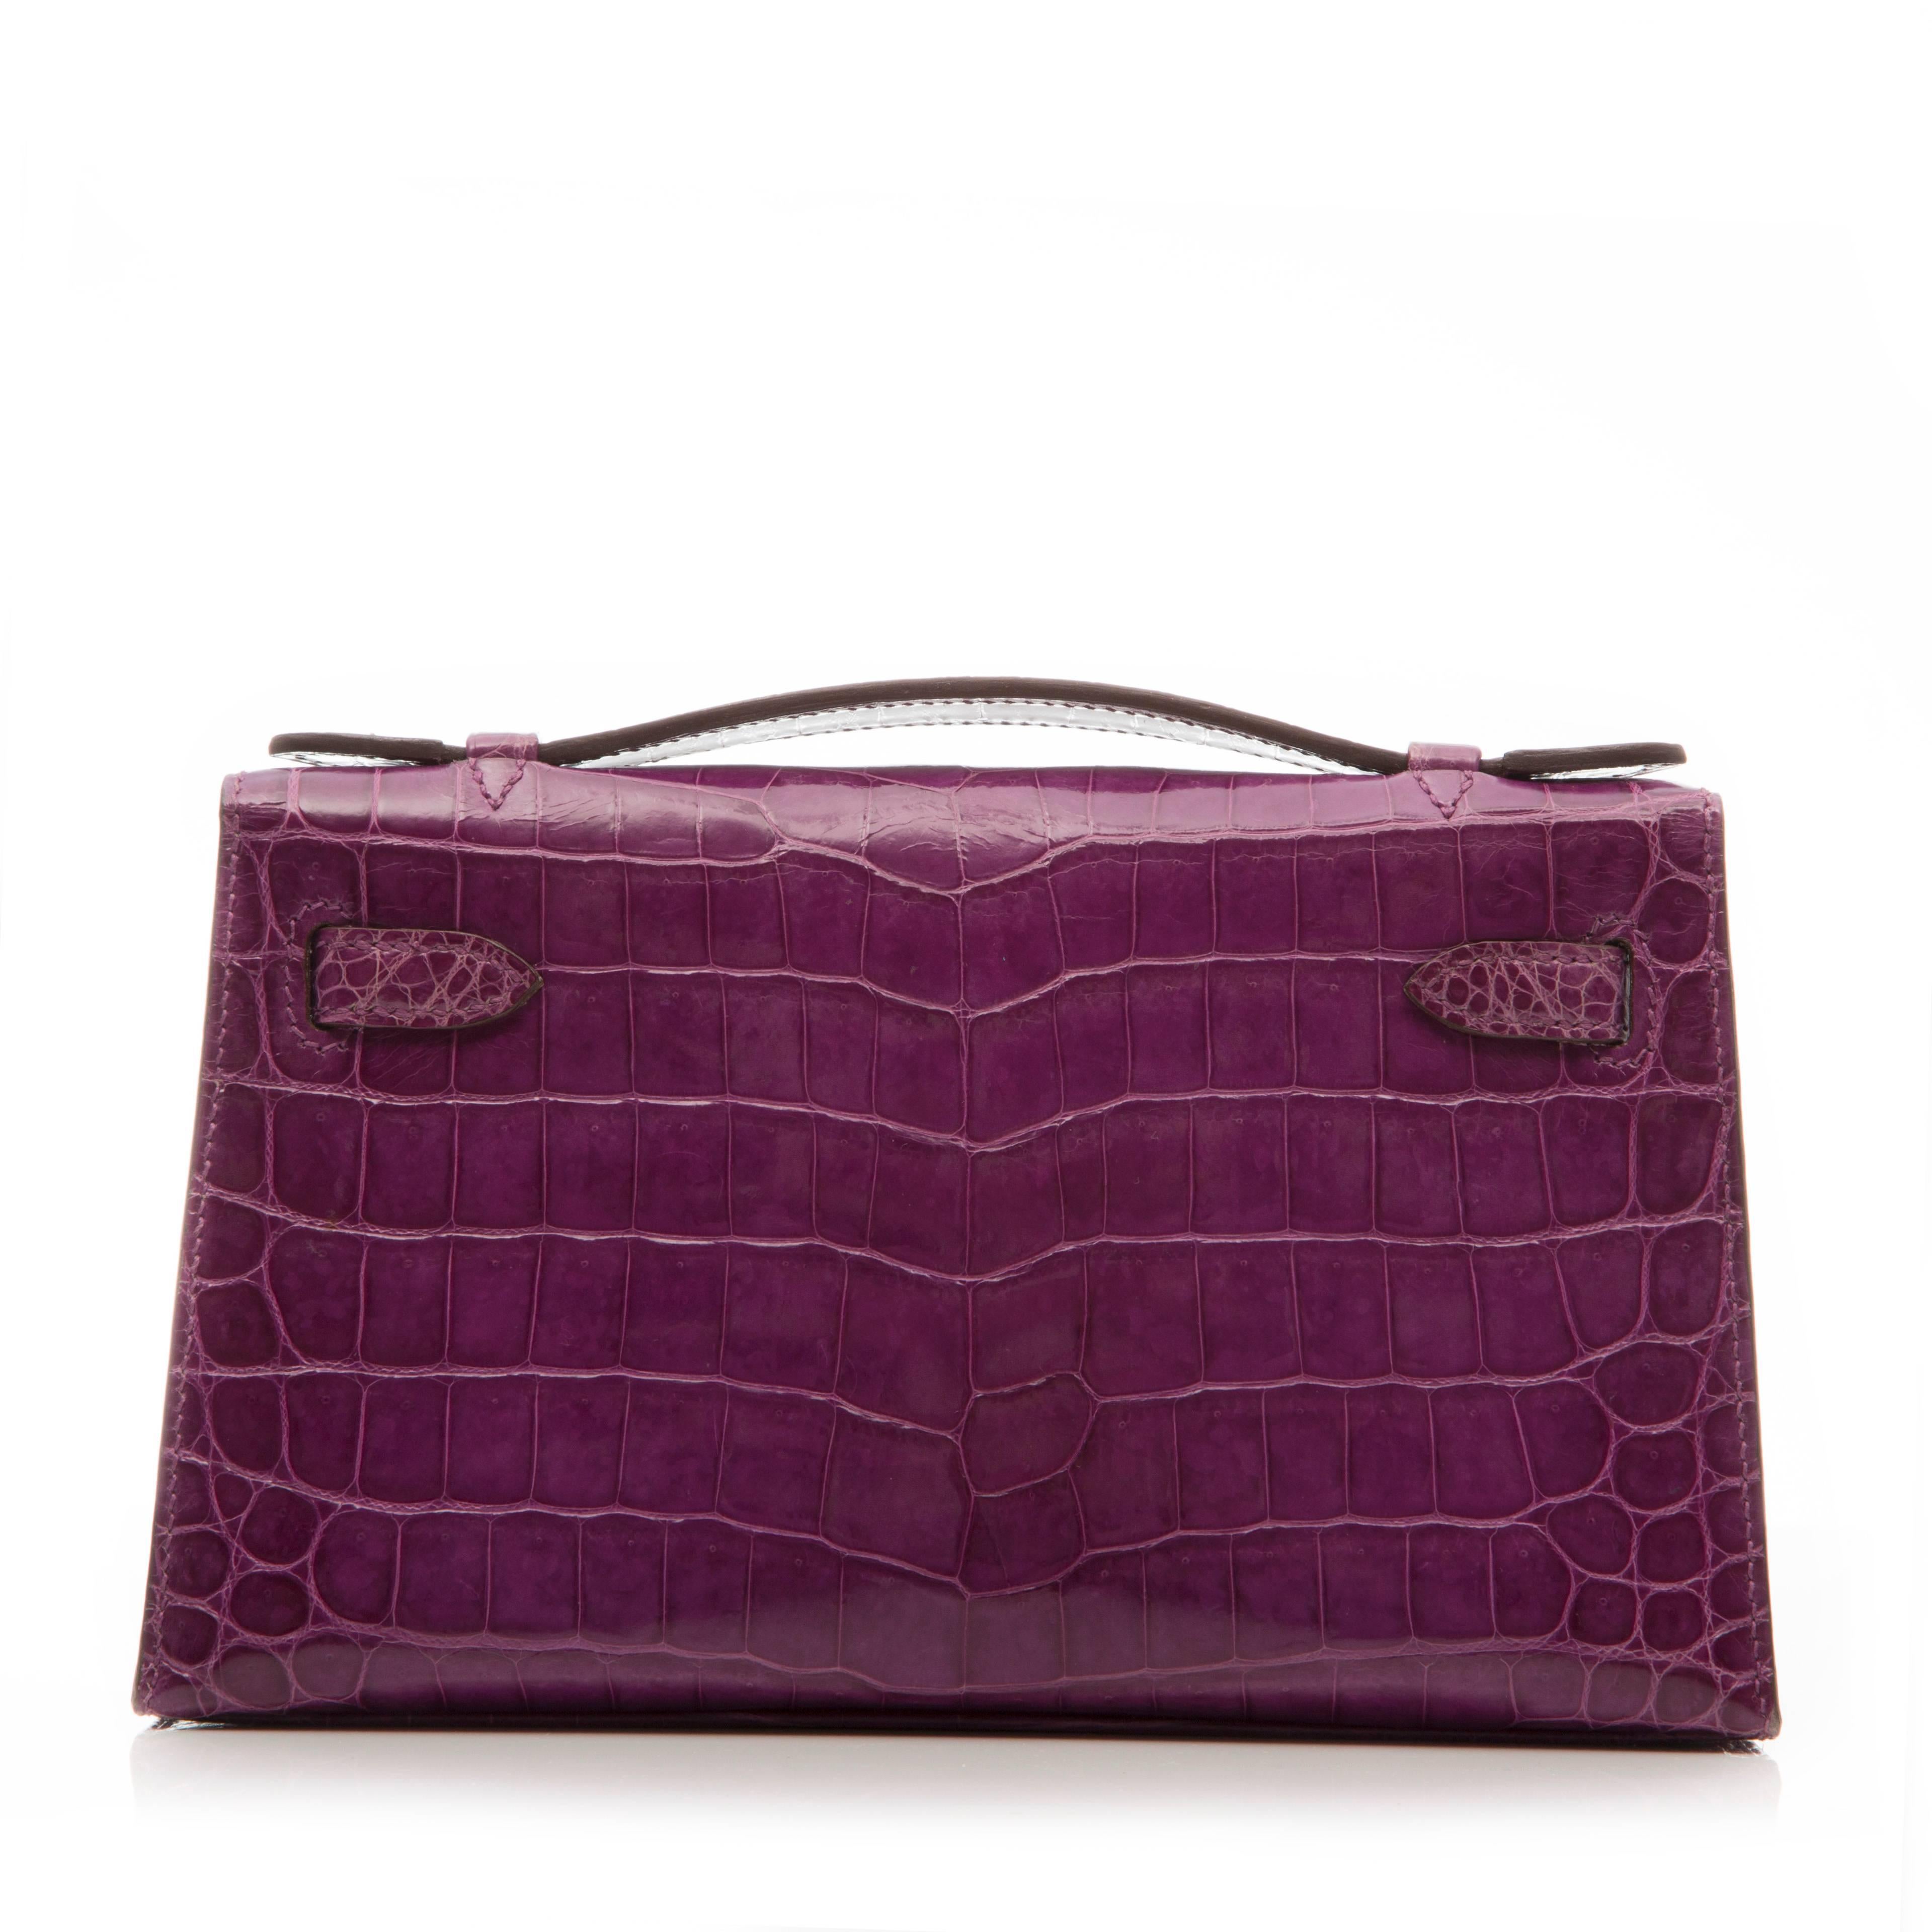 While miniature in size, the Hermès Kelly Pochette is filled with the signature details of its big sister, the Kelly tote. This Hermès Kelly Pochette is crafted from a glossy Niloticus Crocodile in fuschia, offset with pale gold-tone hardware. It